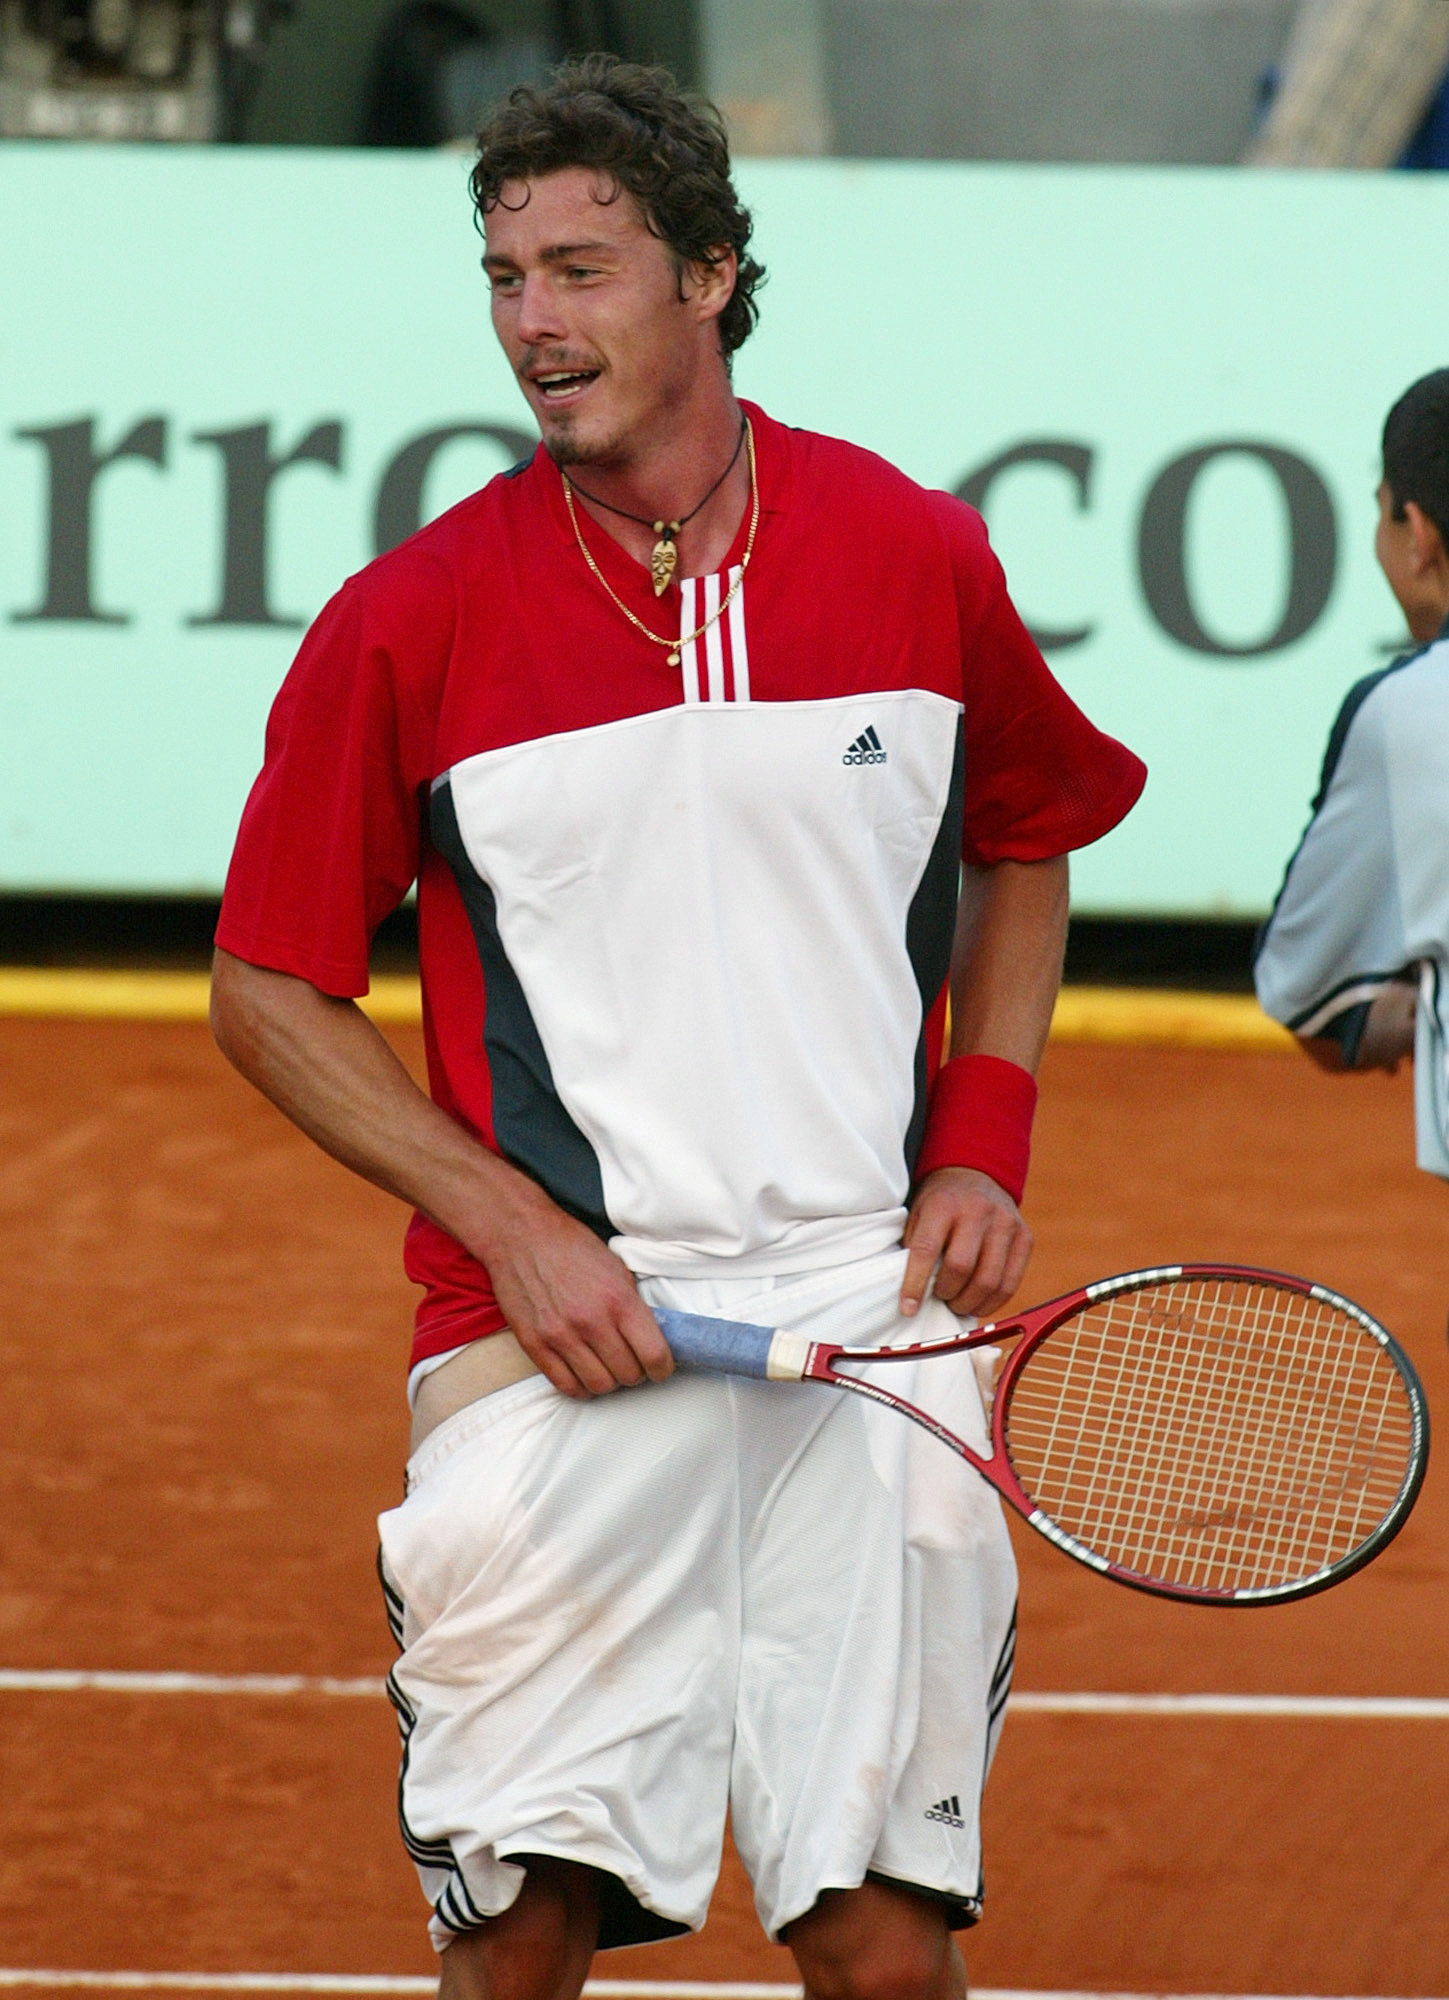 Marat Safin acts as if he was taking off his shorts after loosing a point against Felix Mantilla of Spain during their second round match of the French Open tennis tournament at the Roland Garros stadium in Paris, May 27, 2004. 